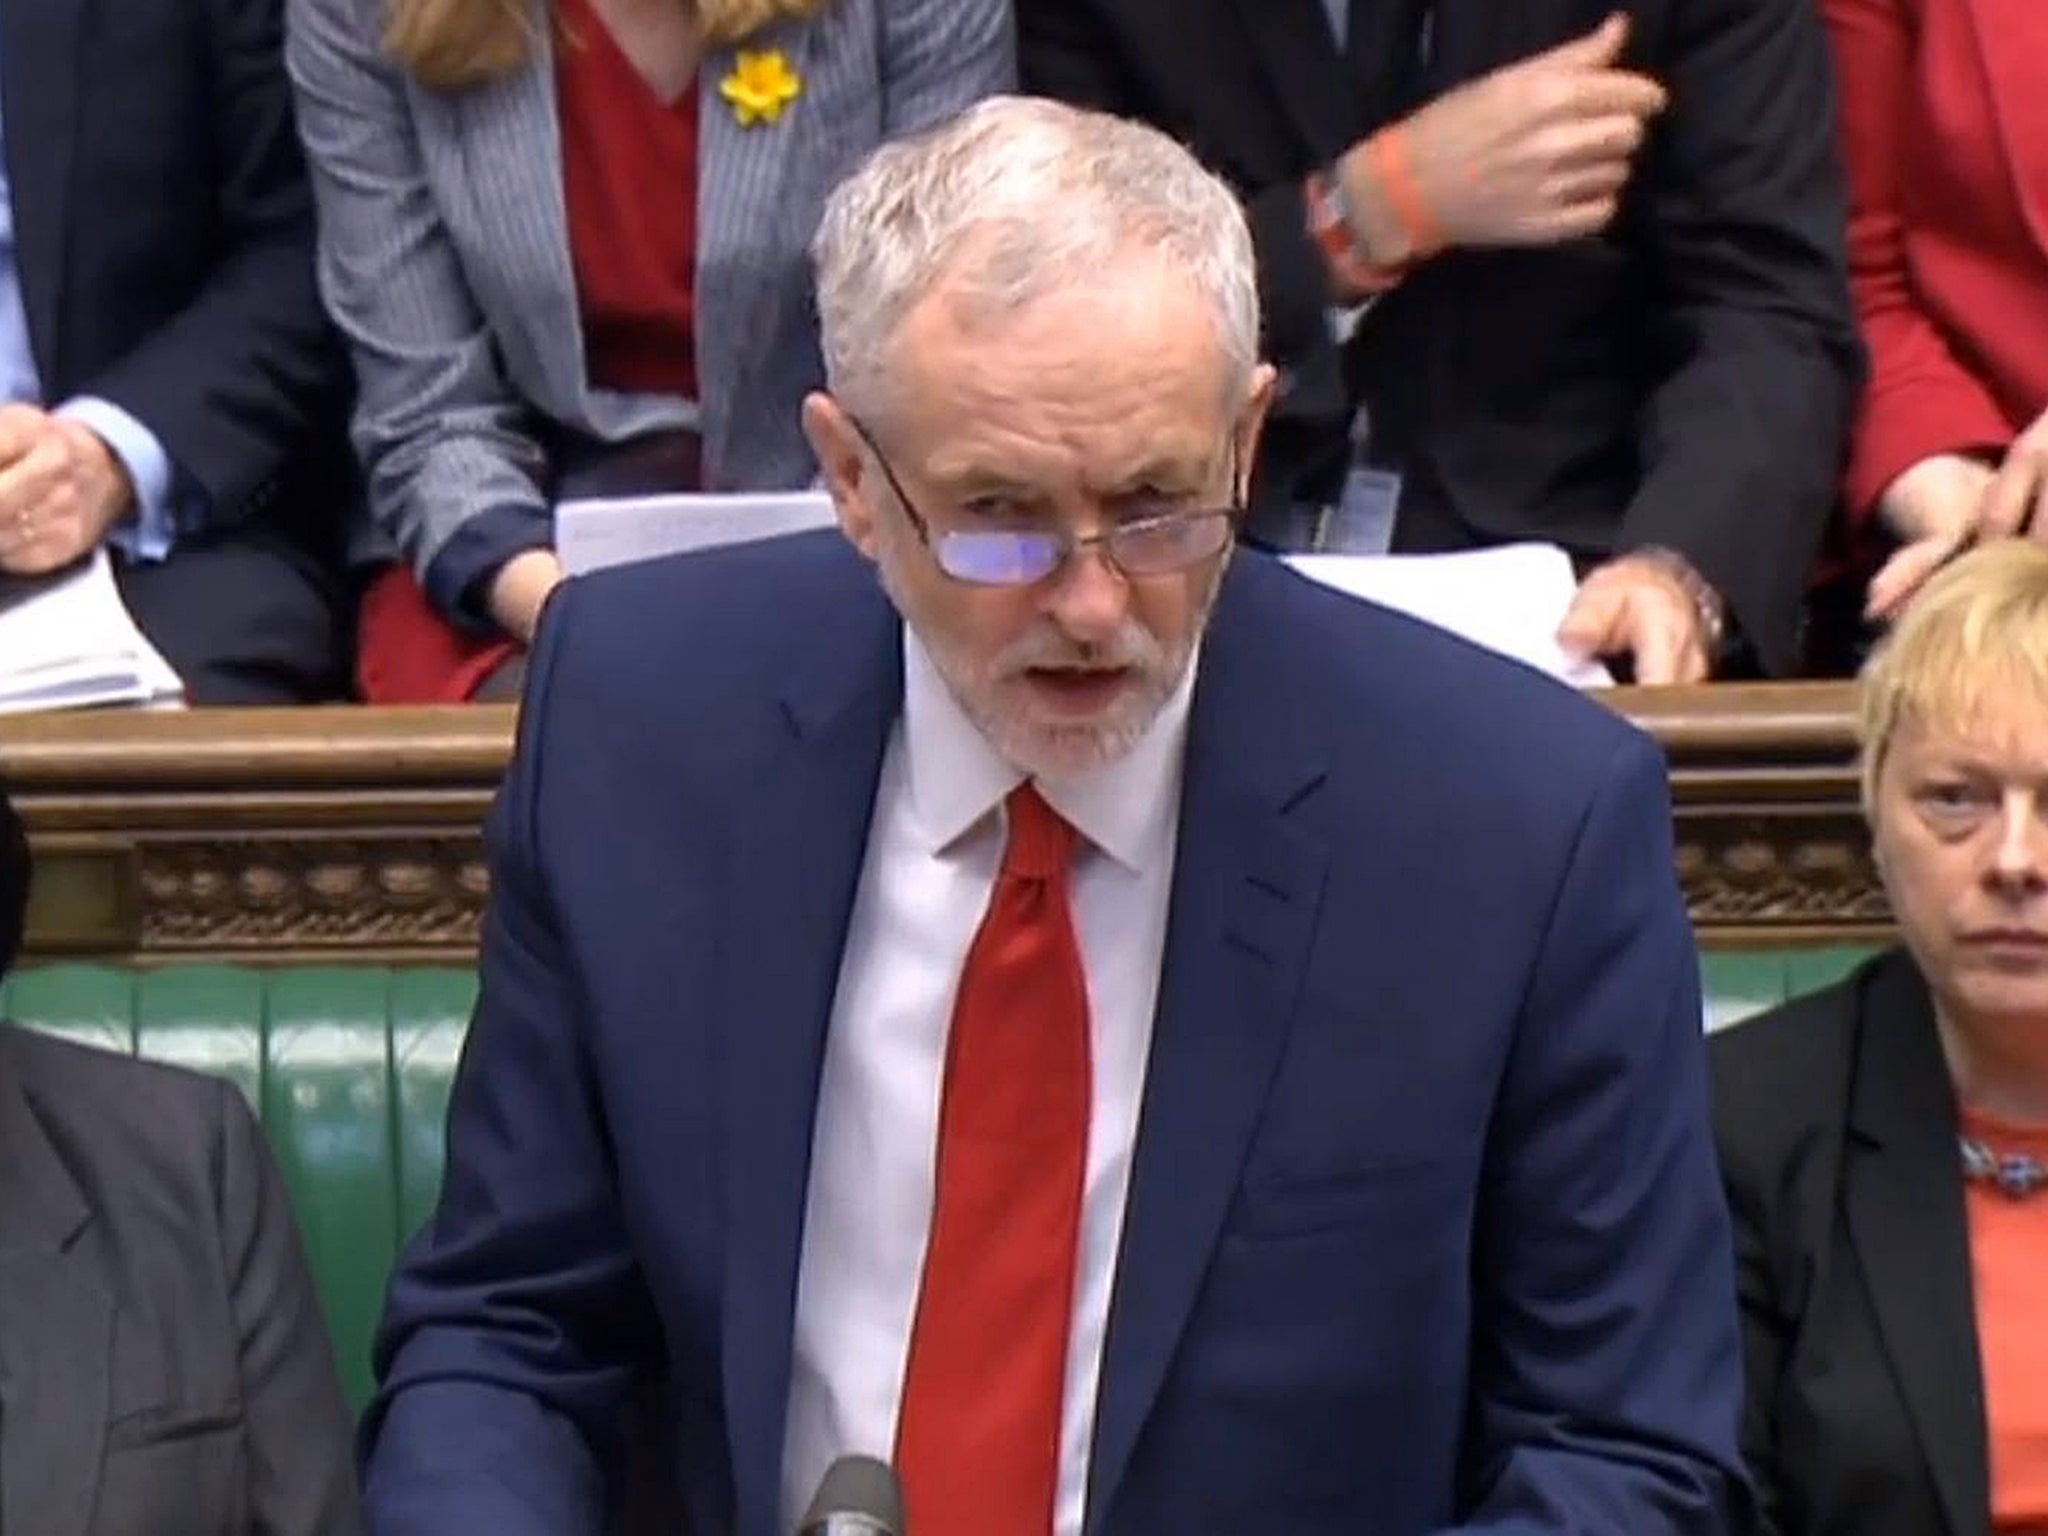 Jeremy Corbyn has consistently opposed the Government's cuts, even if he is incapable of making any impact in parliament